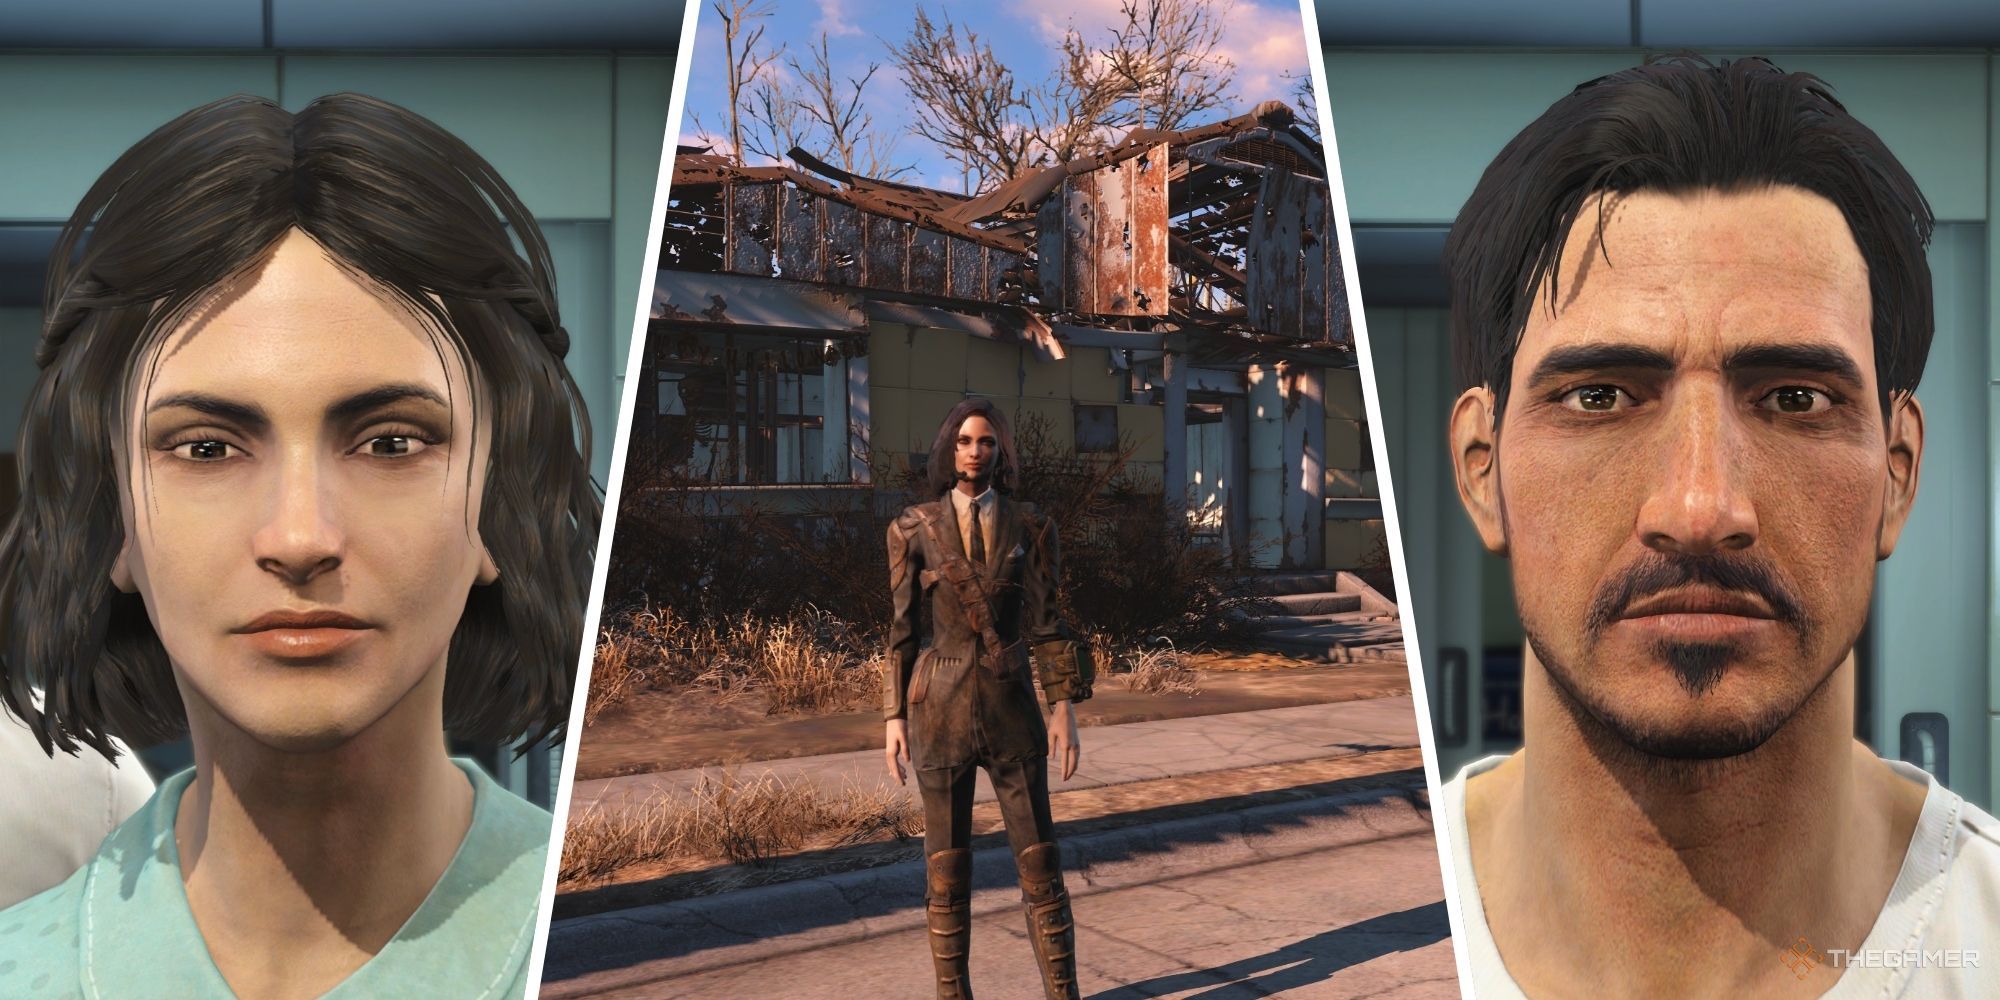 Fallout Split image of the female character creation, a character with armour and a suit, and the male character creation screen